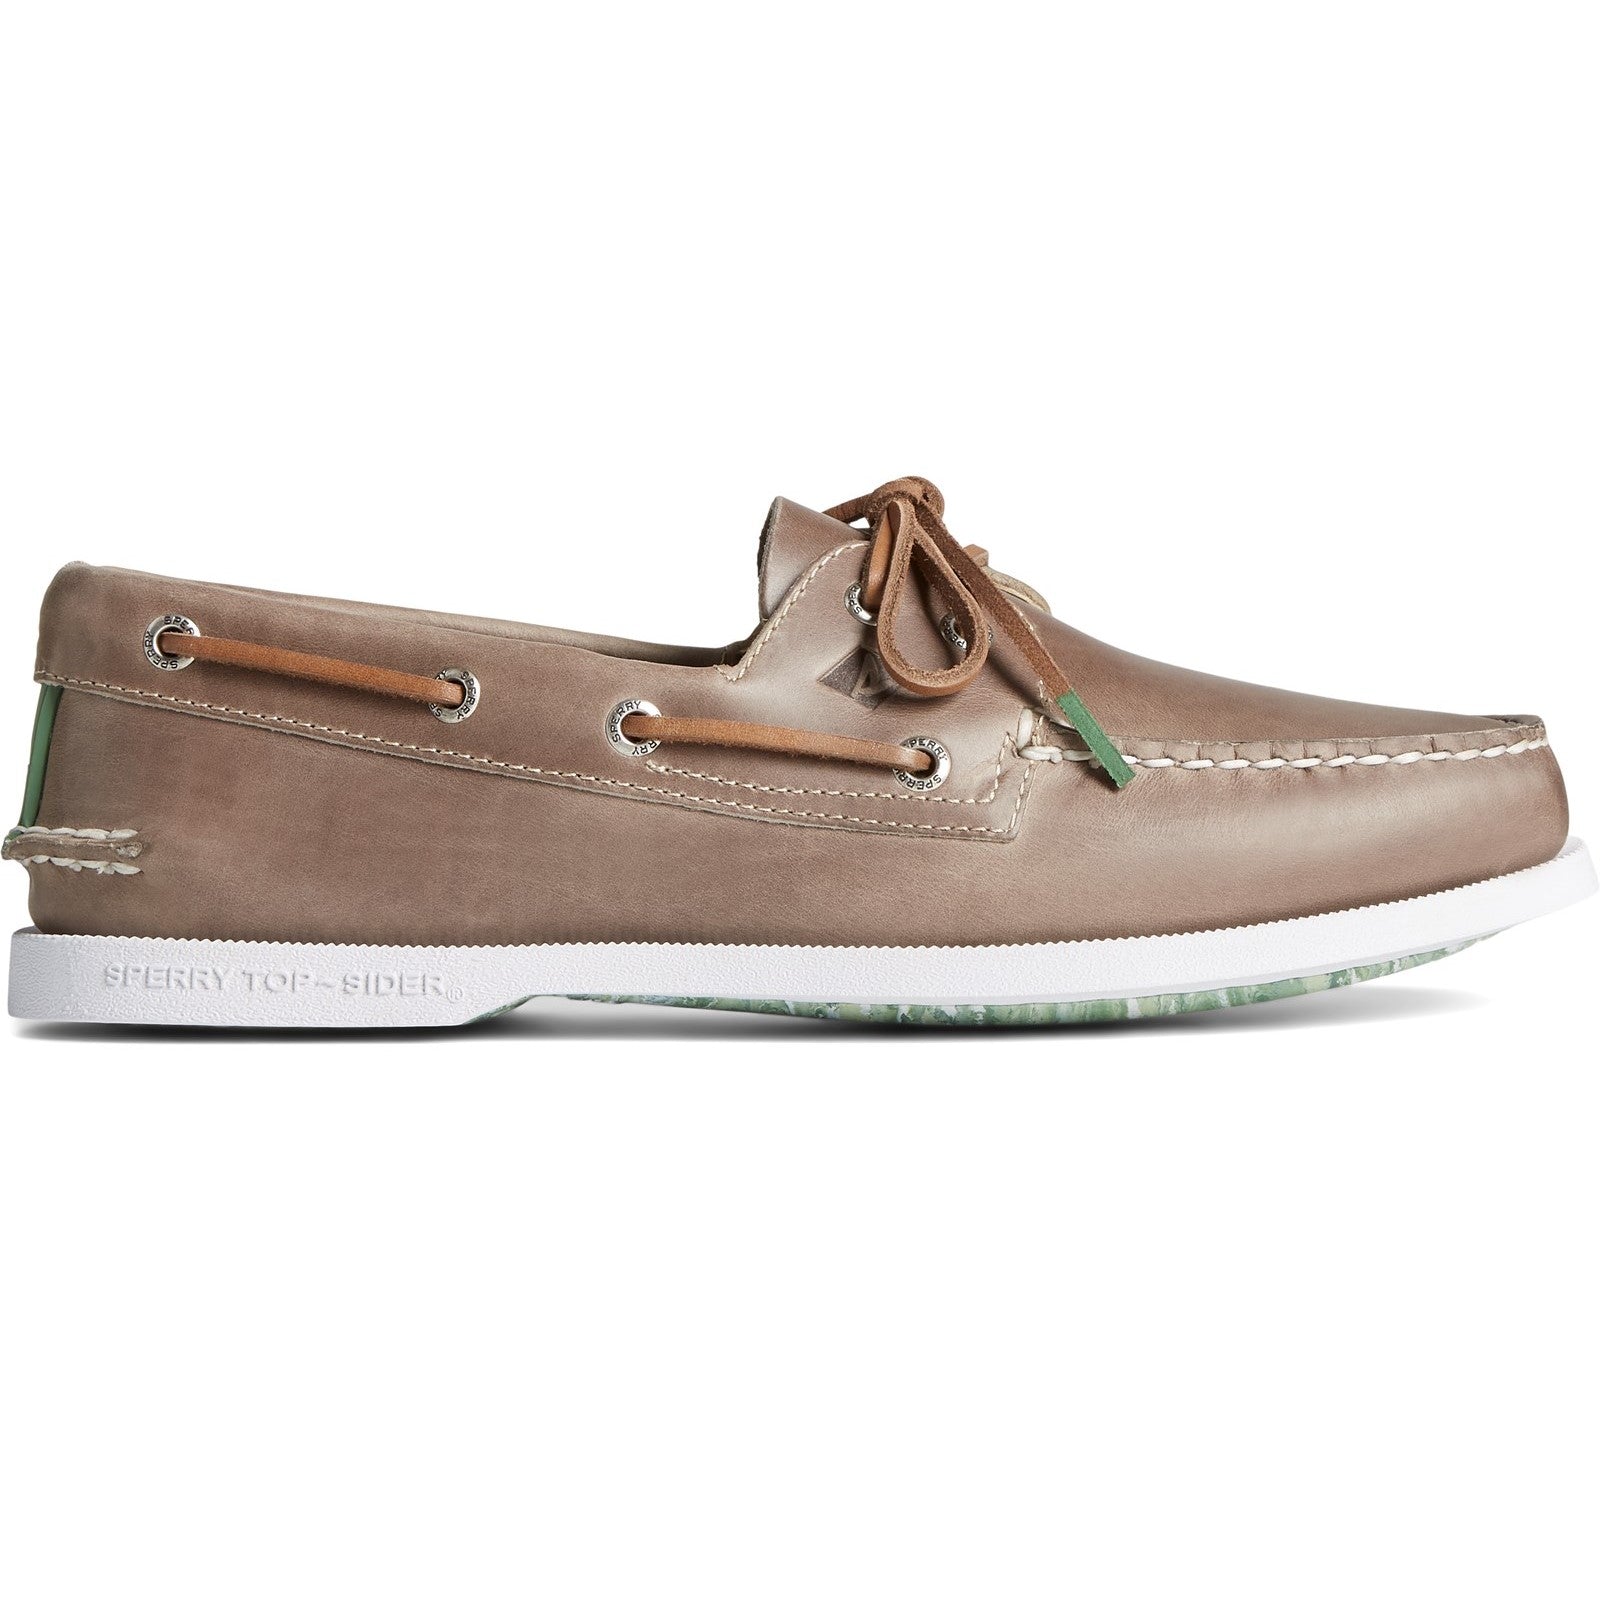 Sperry Mens Authentic Original 2-Eye Pullup Boat Shoes - Taupe